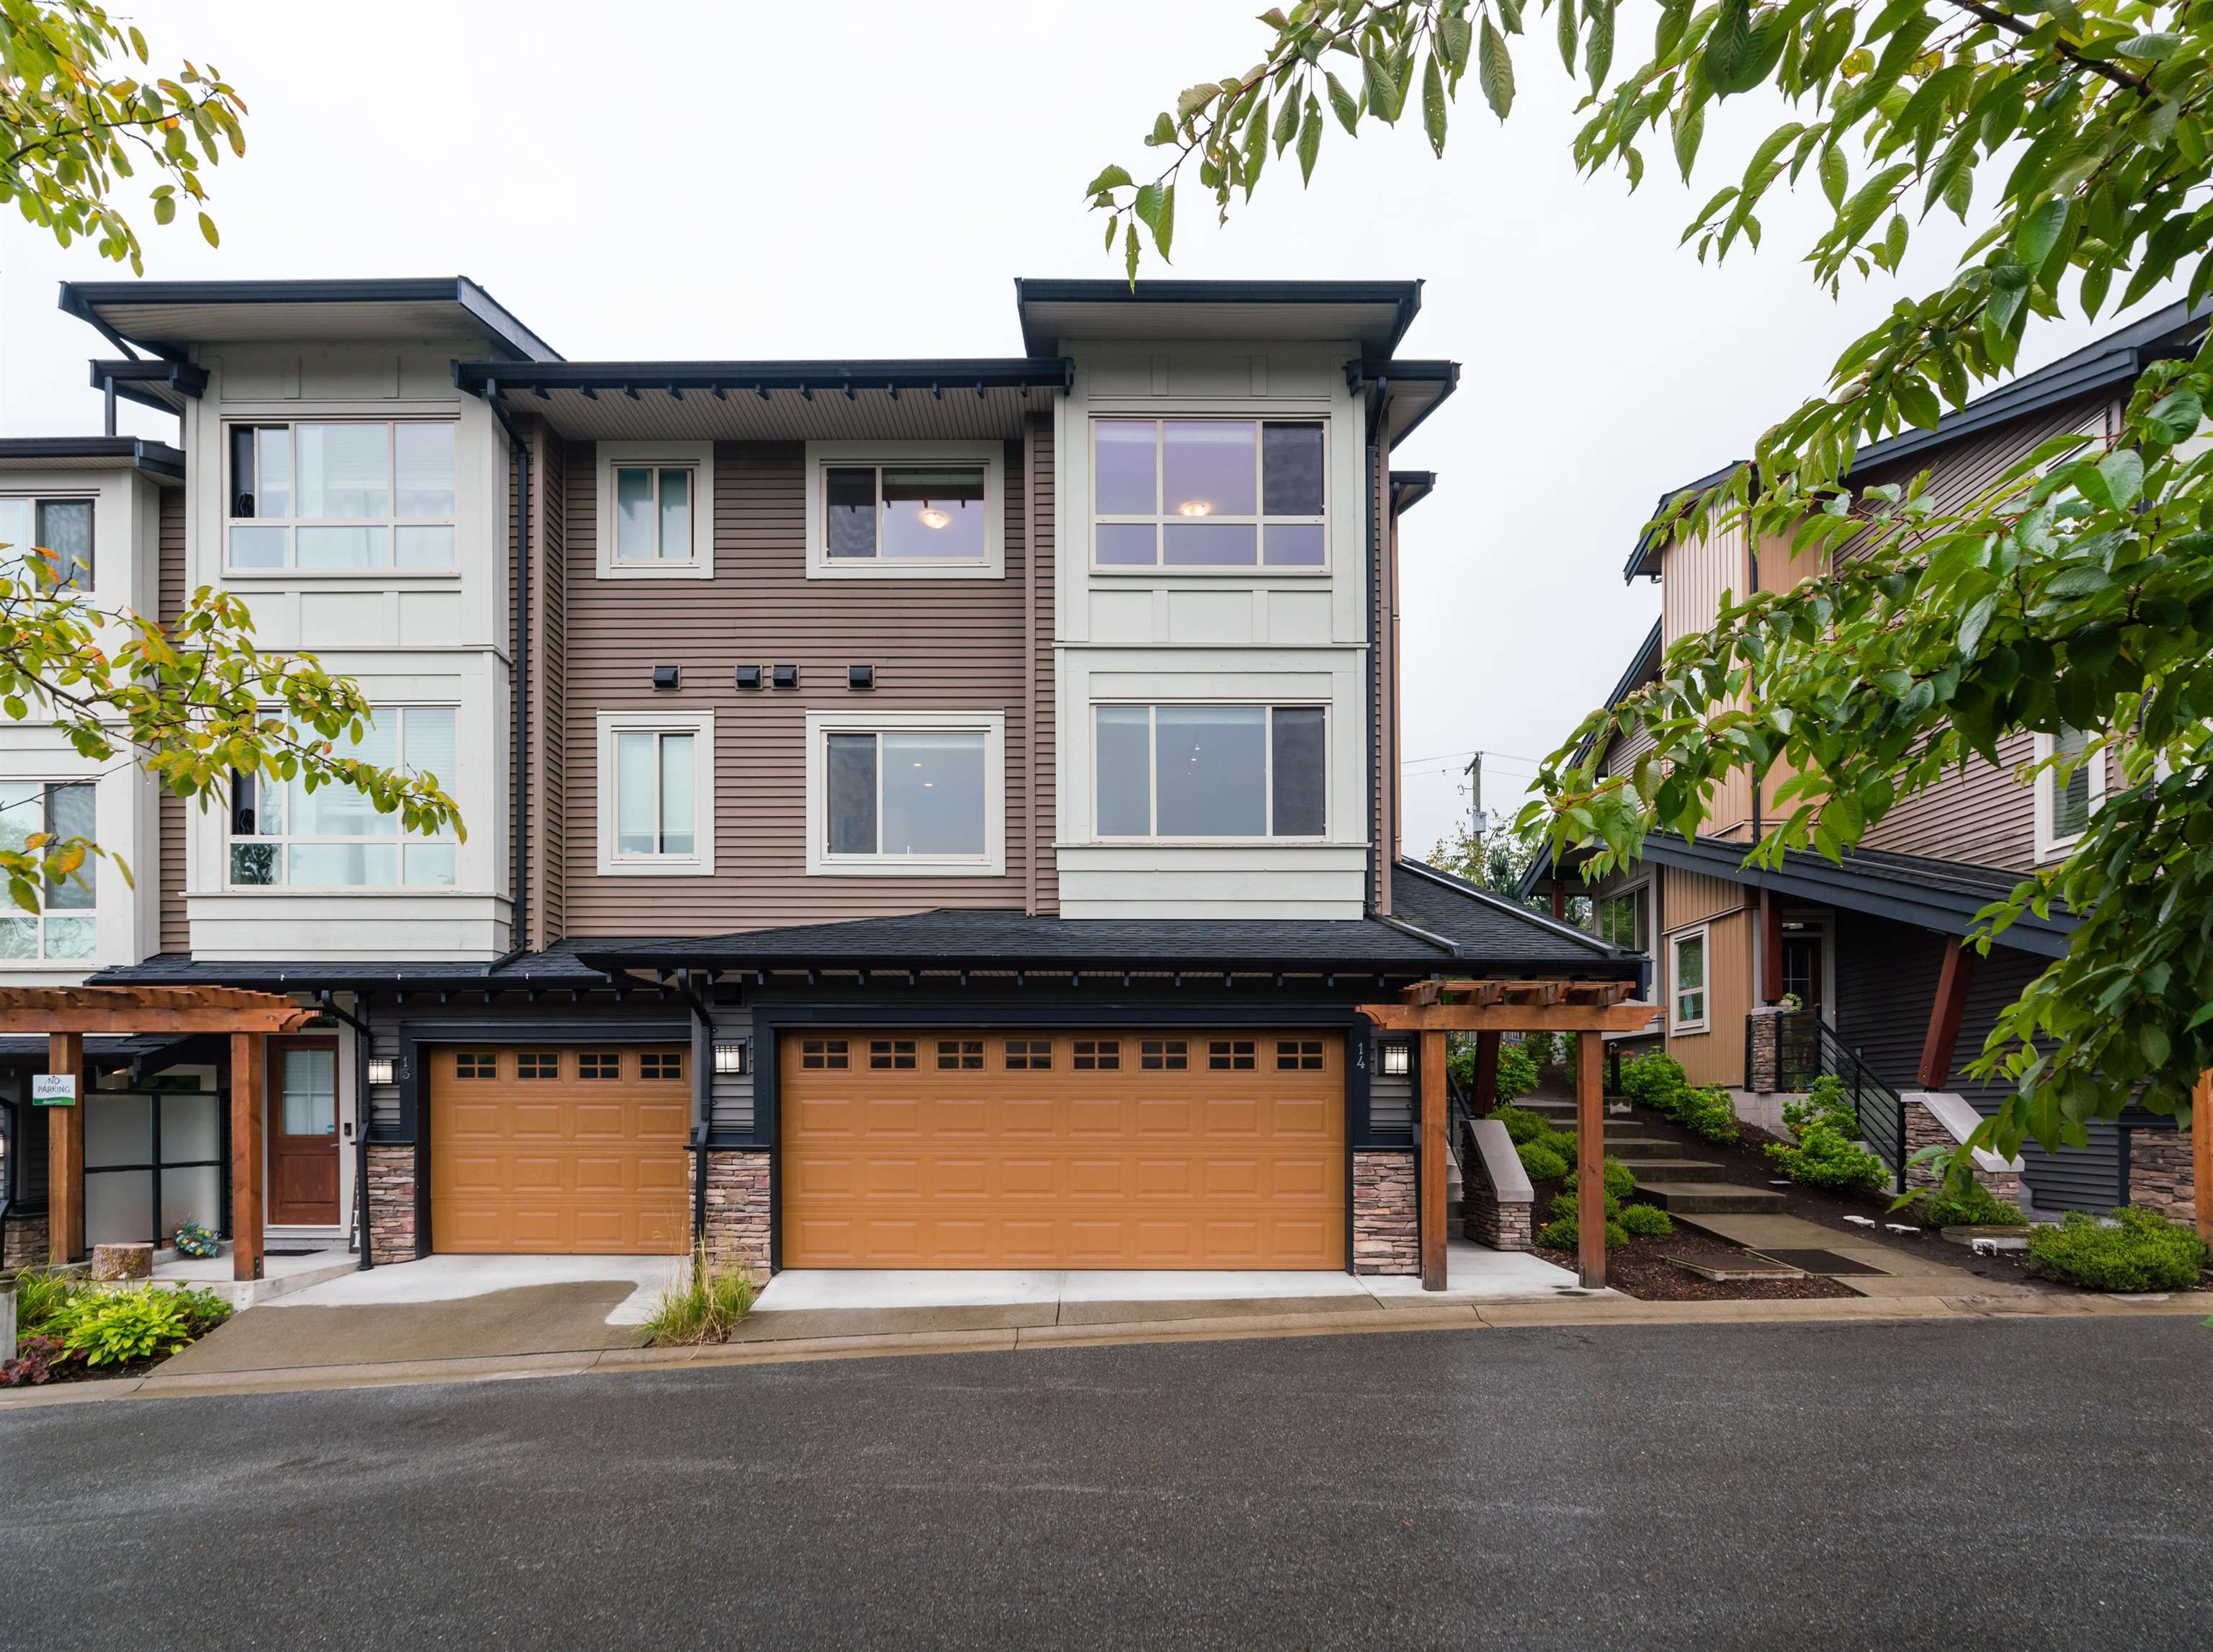 New property listed in Albion, Maple Ridge